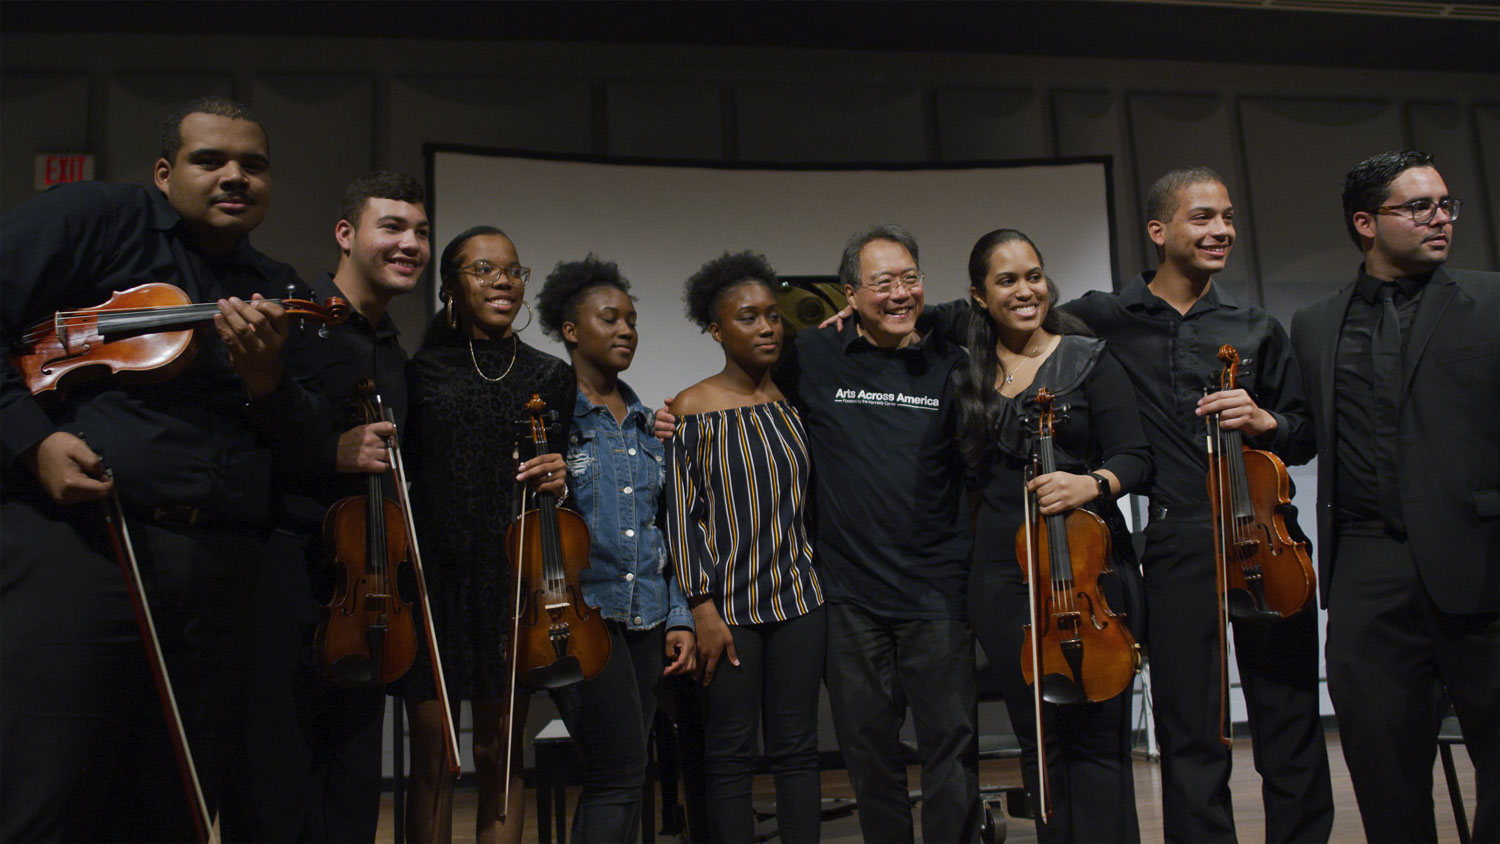 The Kennedy Center Yo-Yo Ma posing with a student band with many holding violins